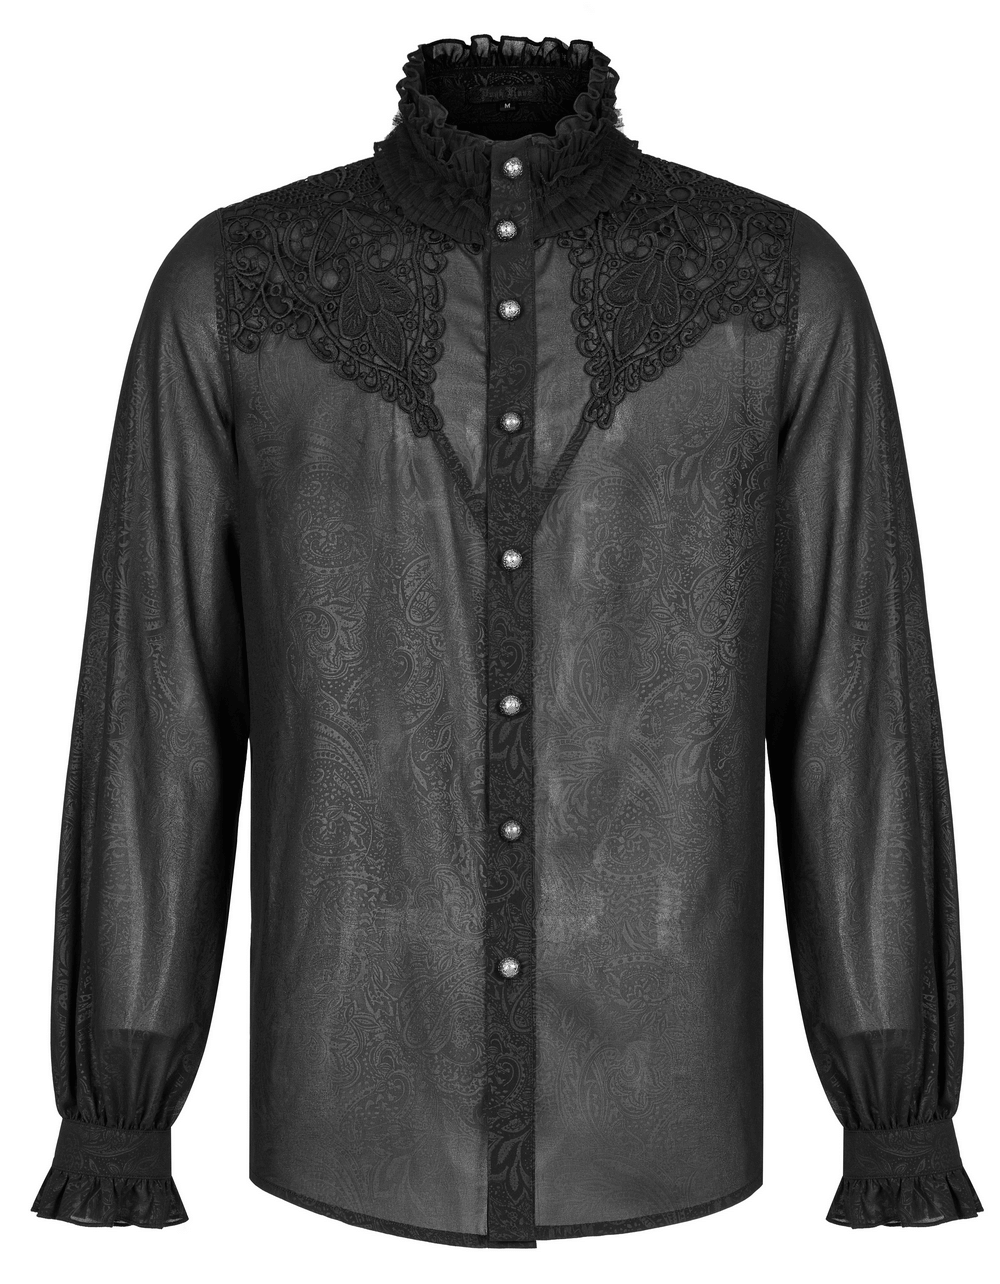 Ruffled Gothic Shirt with Printed Sleeves And Applique Detail - HARD'N'HEAVY